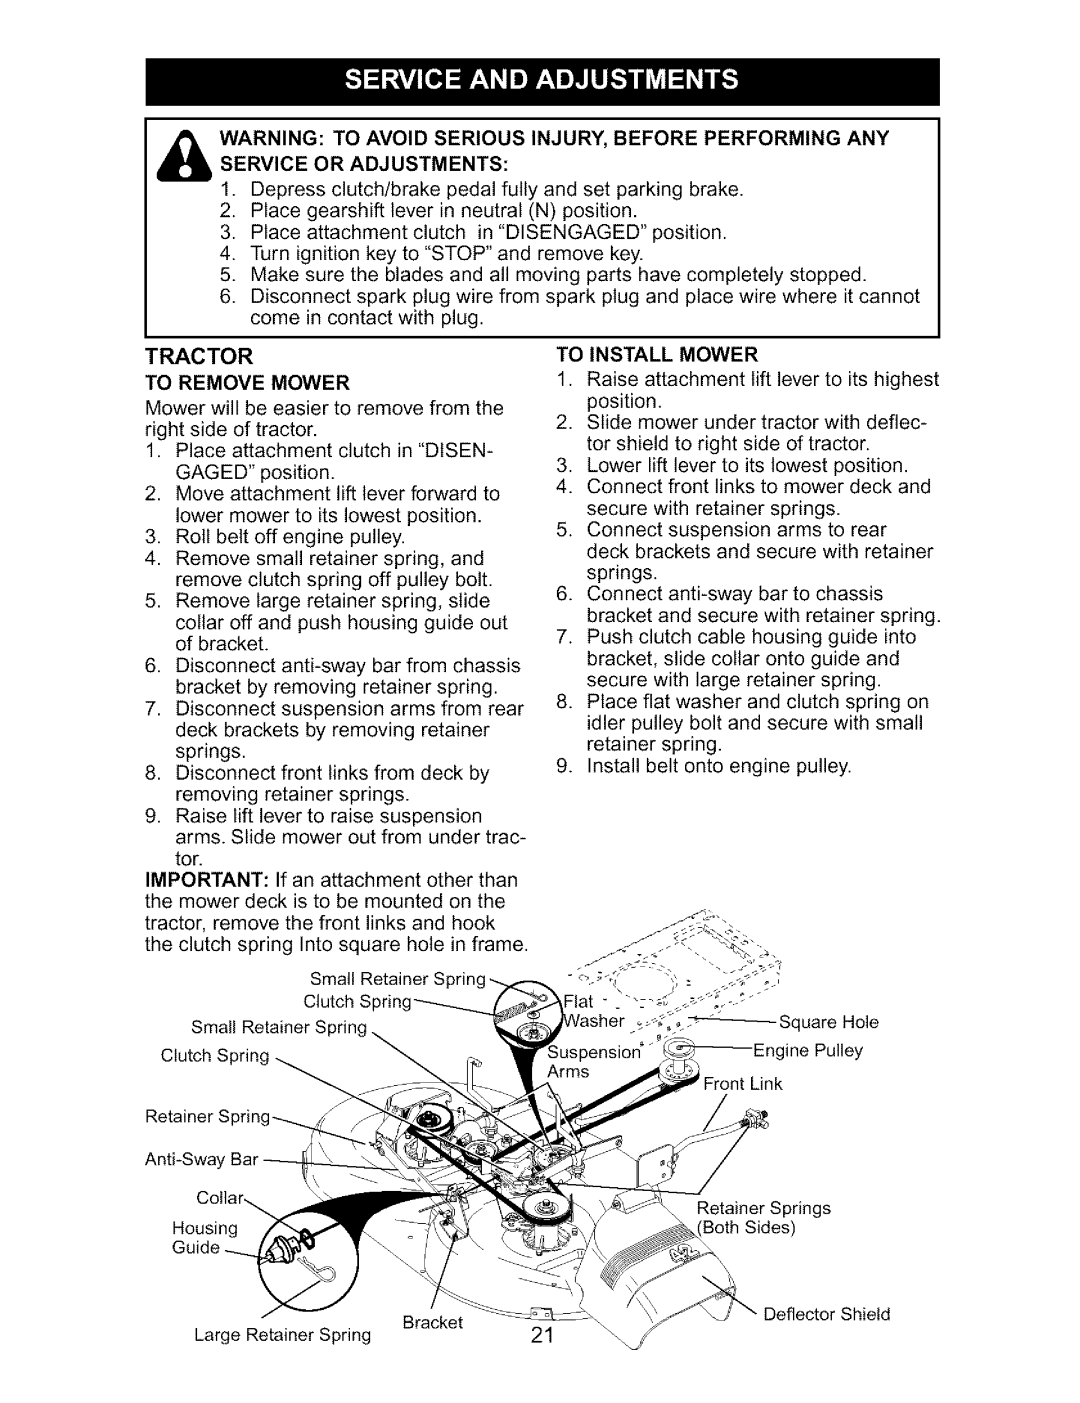 Craftsman 917.27317 owner manual Tractor, To Remove Mower, To Install Mower 